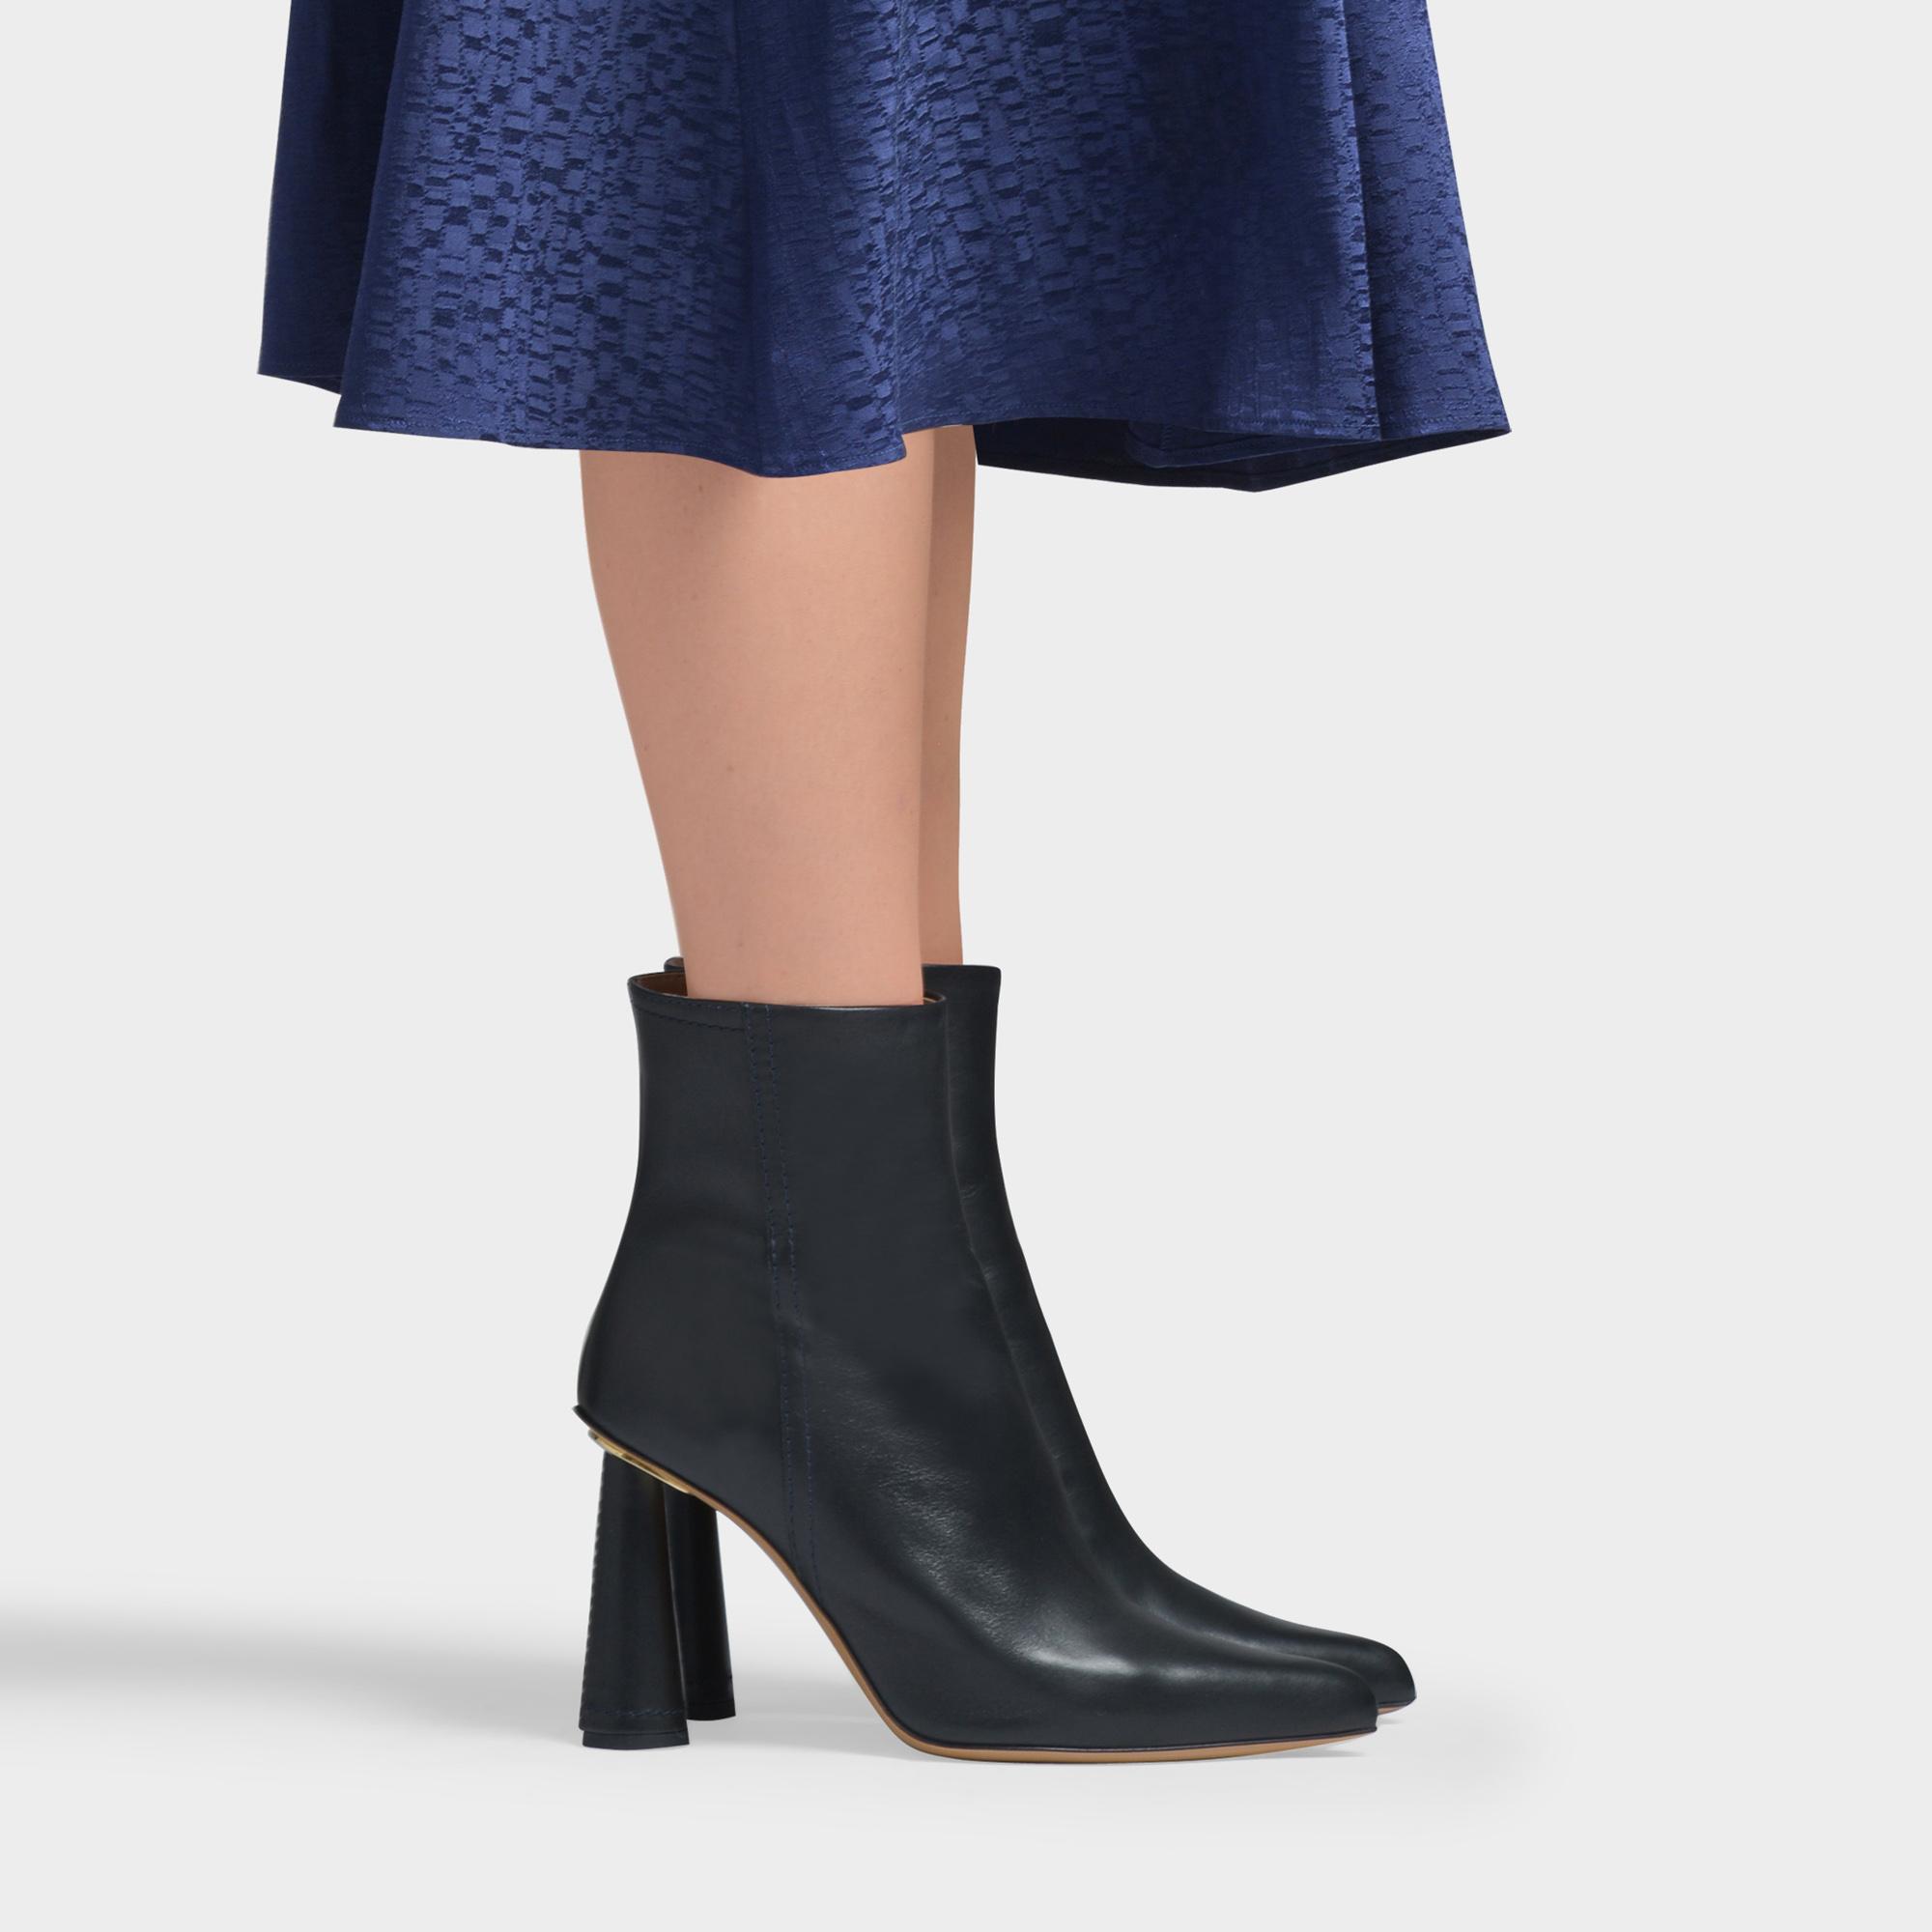 Jacquemus Leather Cone Heel Ankle Boots in Black | Lyst